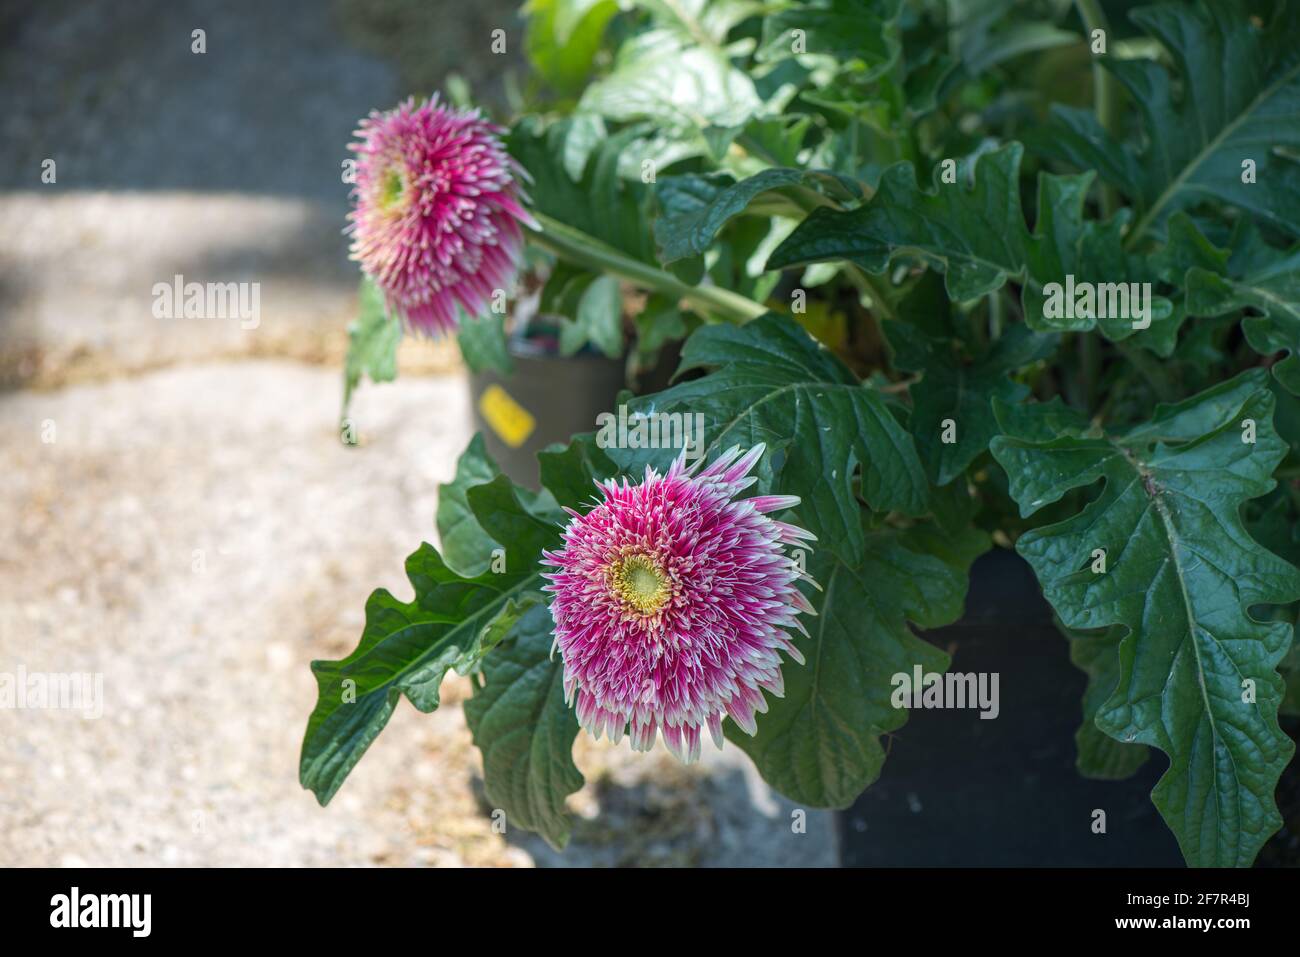 variegated, double hot pink gerbera daisy in a pot Stock Photo